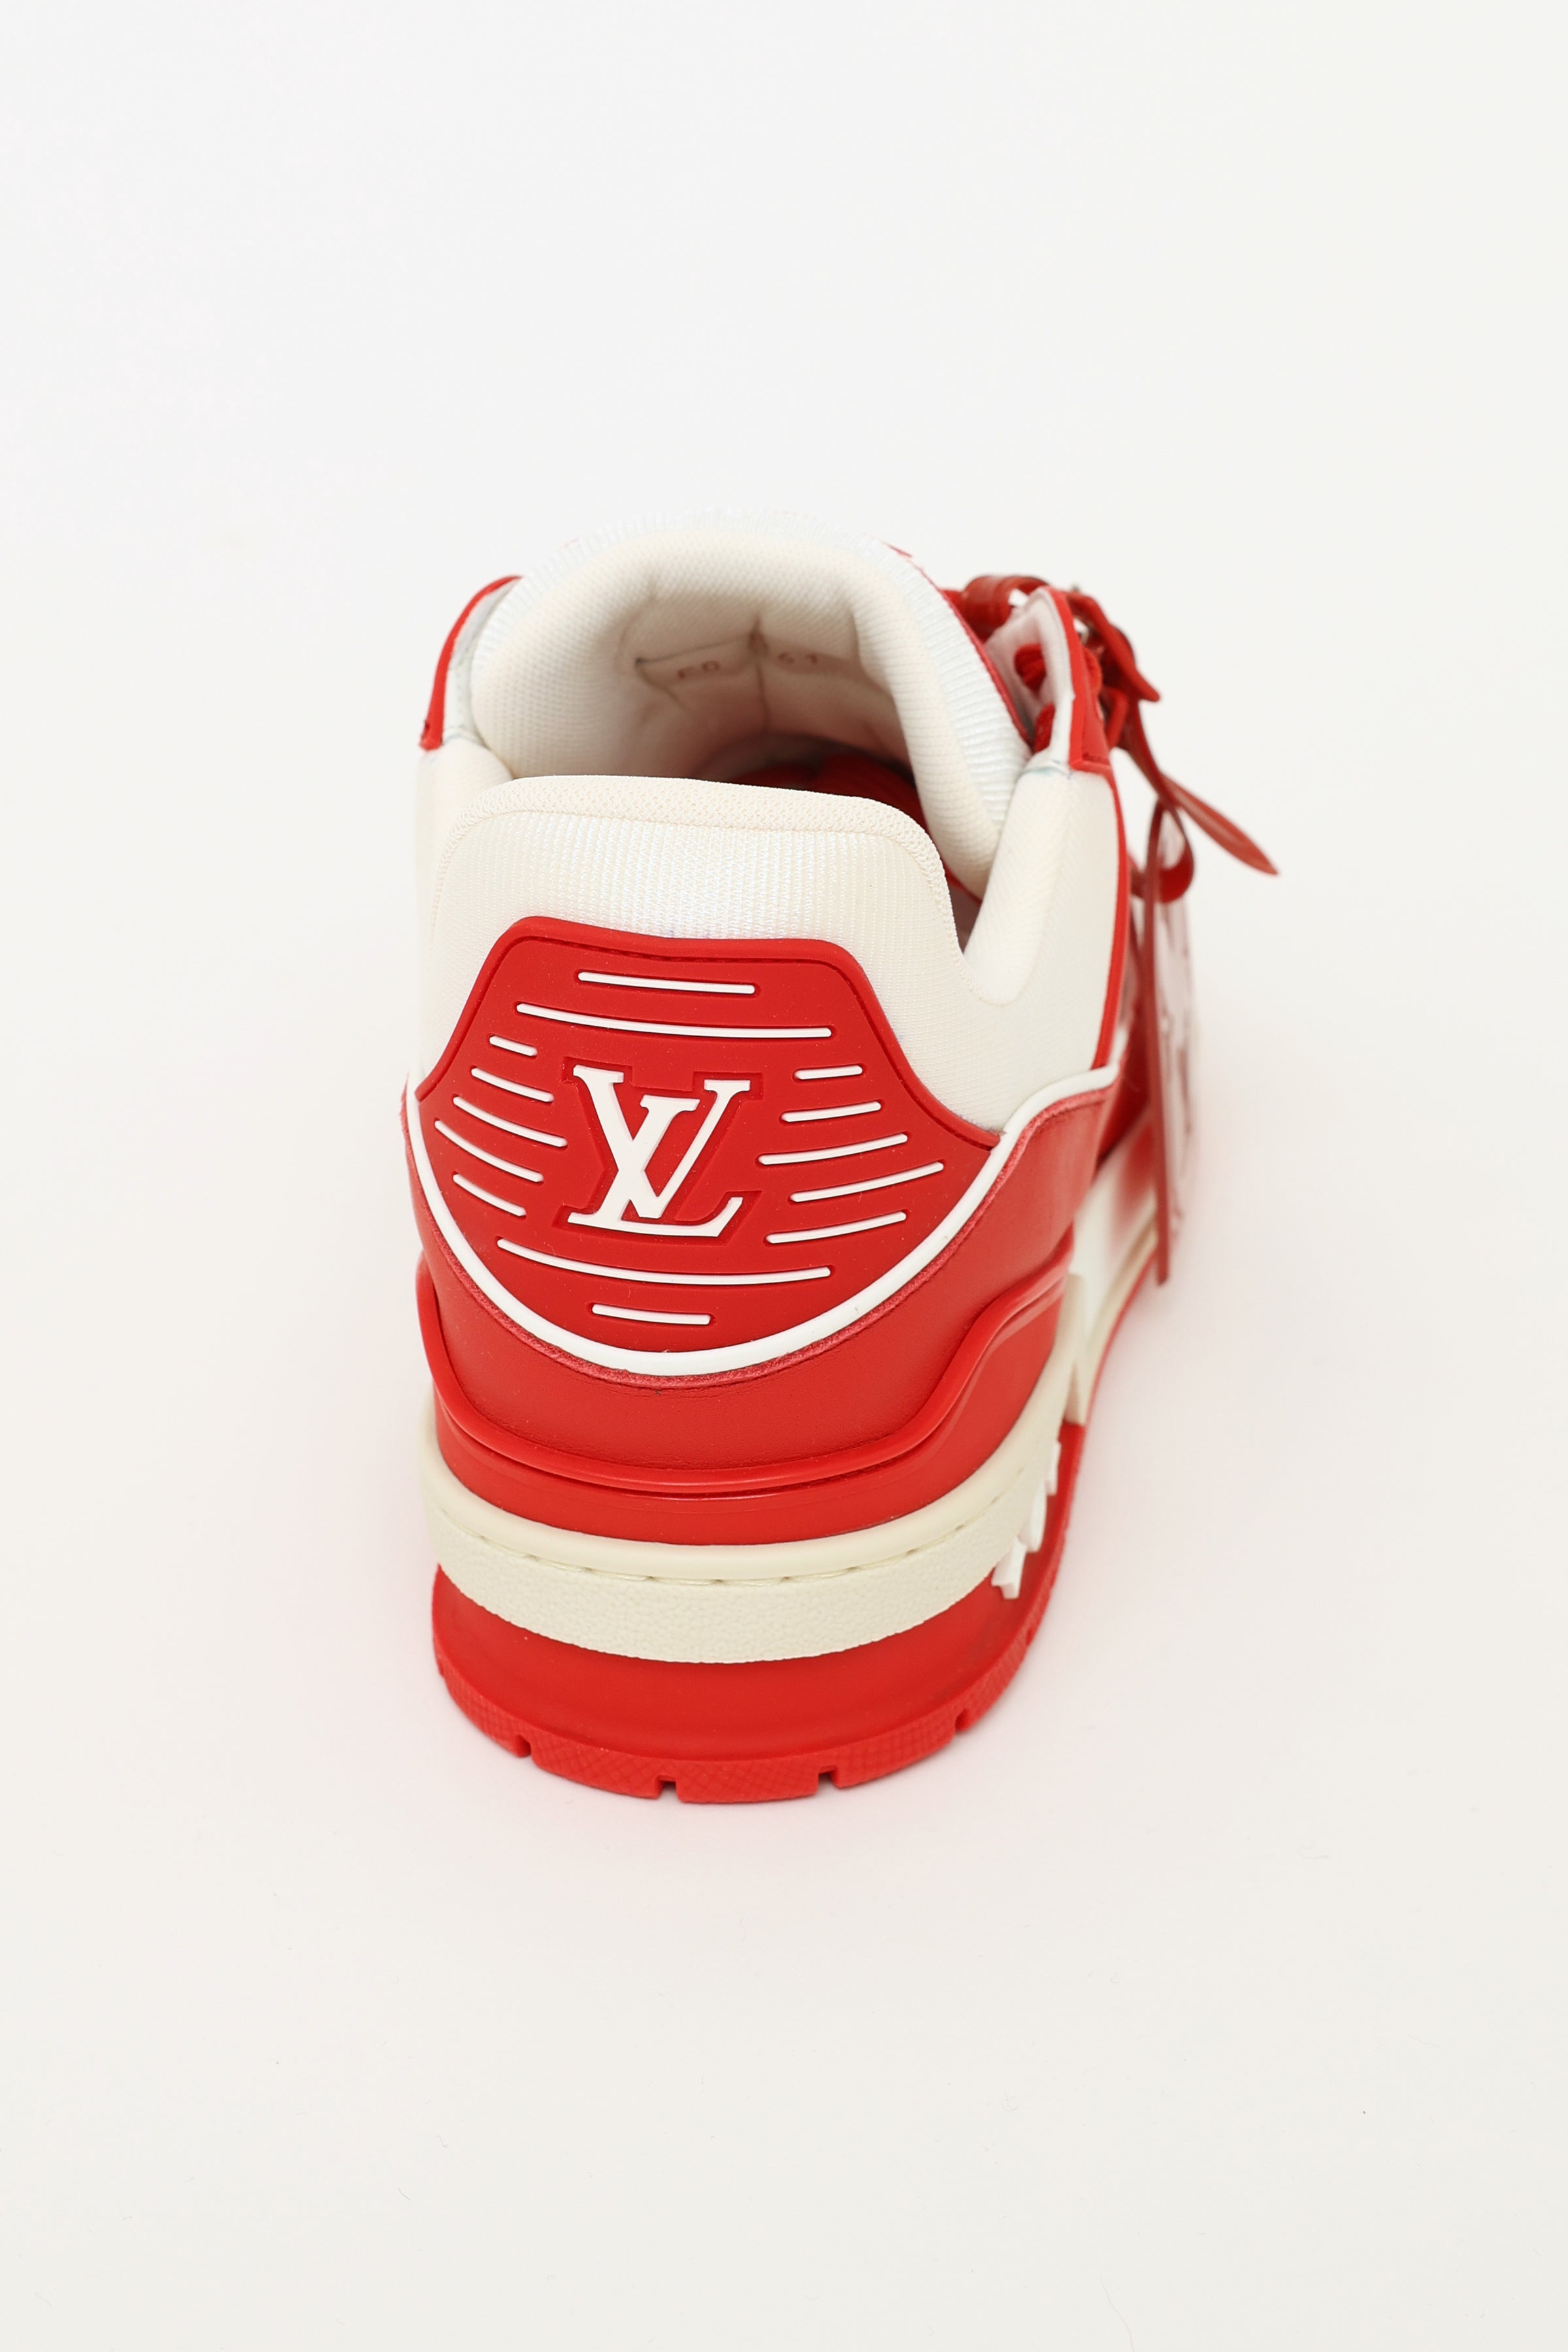 This Sample (RED) x LV Trainer Is Being Auctioned Off for Charity